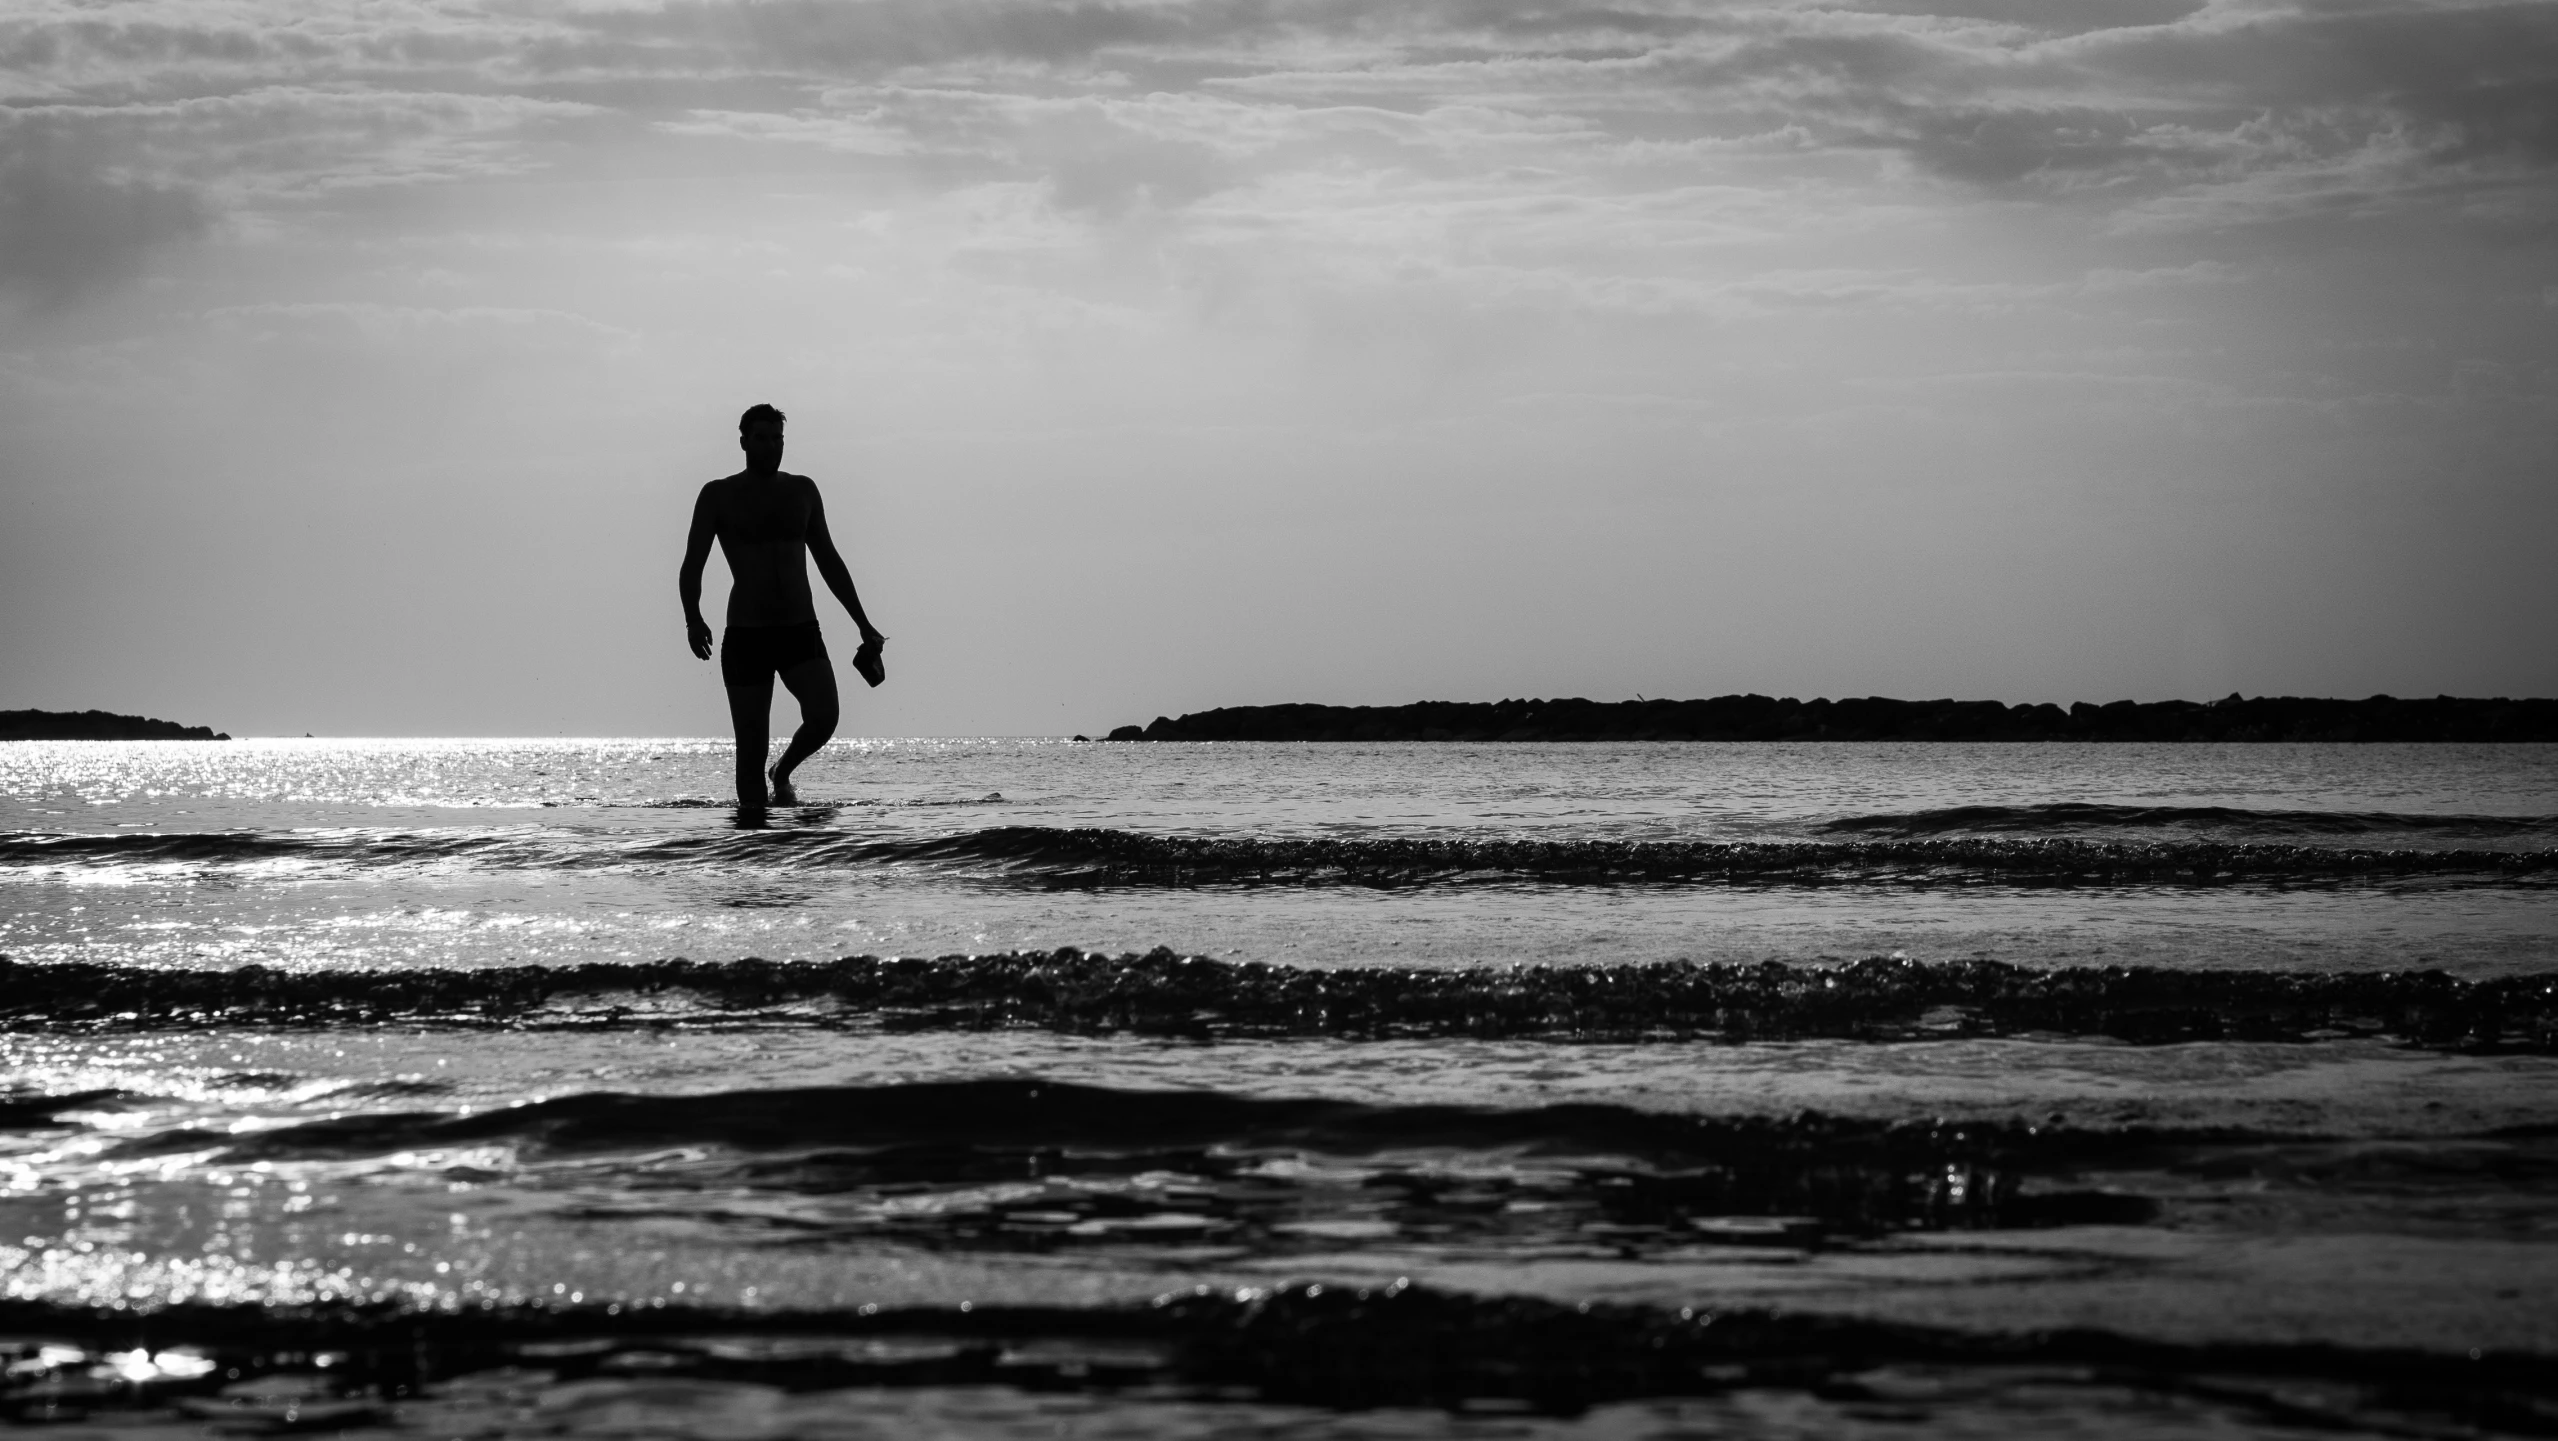 the silhouette of a man in the water